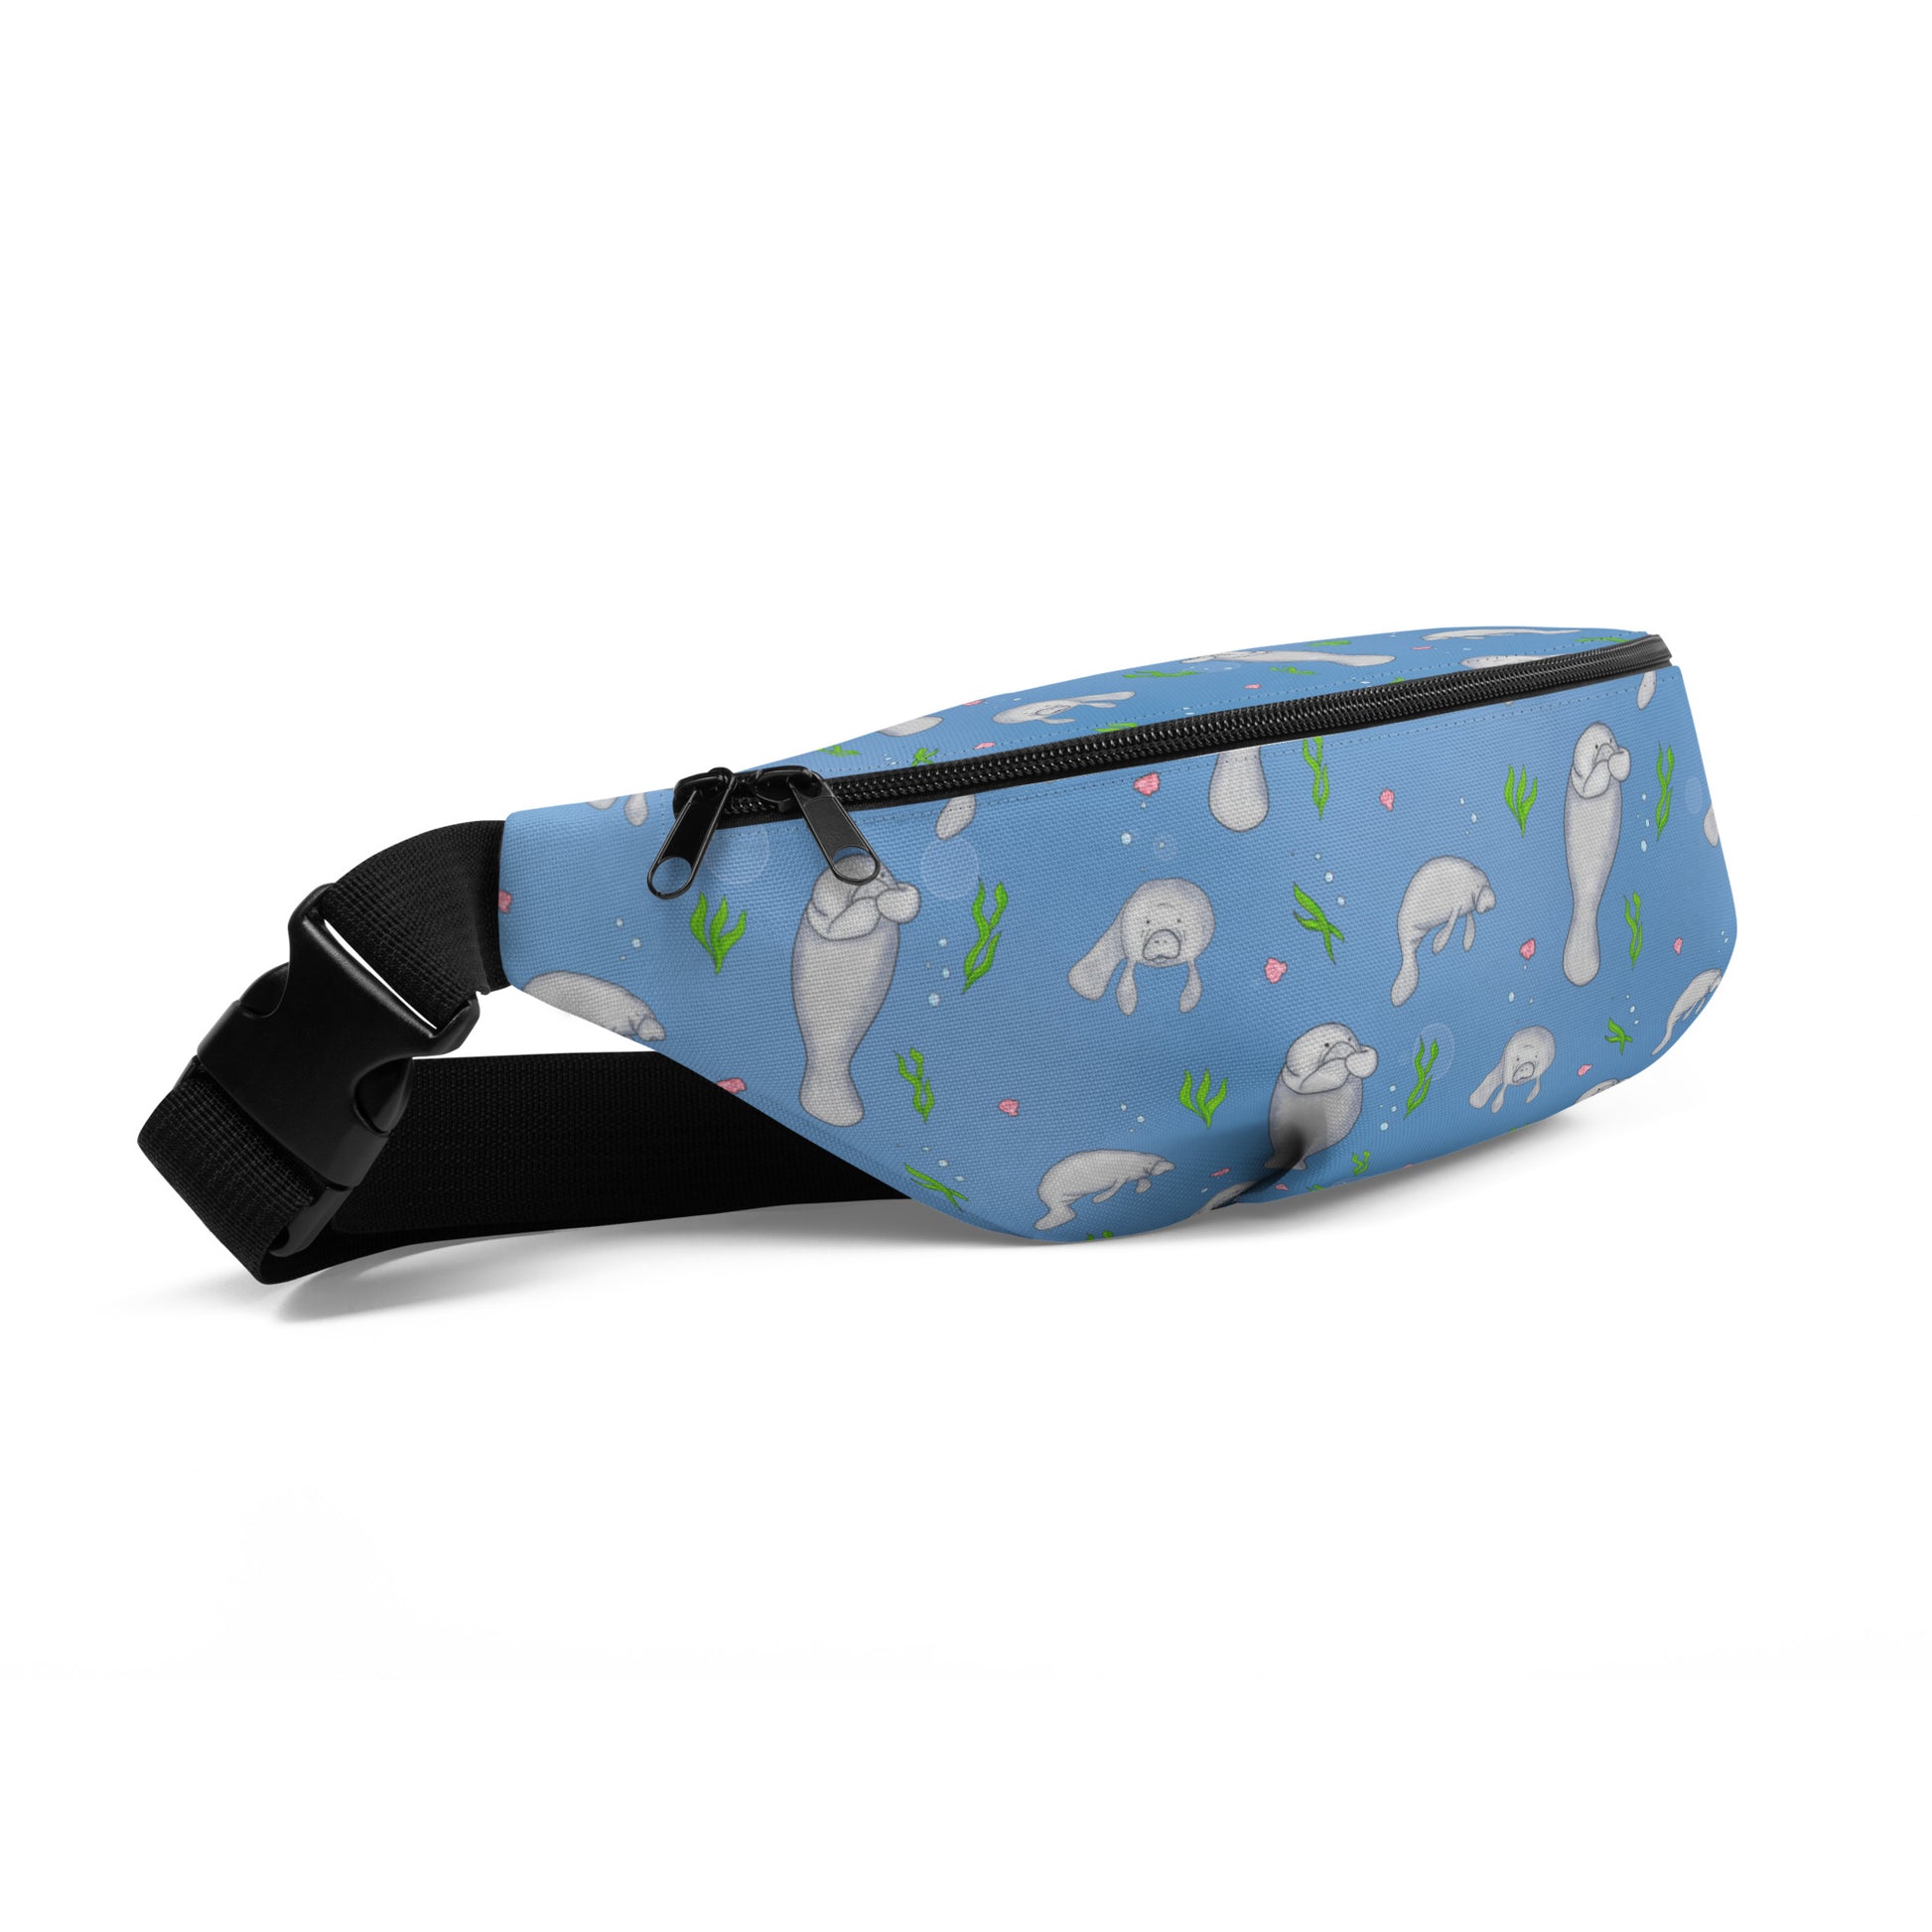 Cute manatee patterned belt bag with adjustable straps, zippered pouch, and small inner pocket.